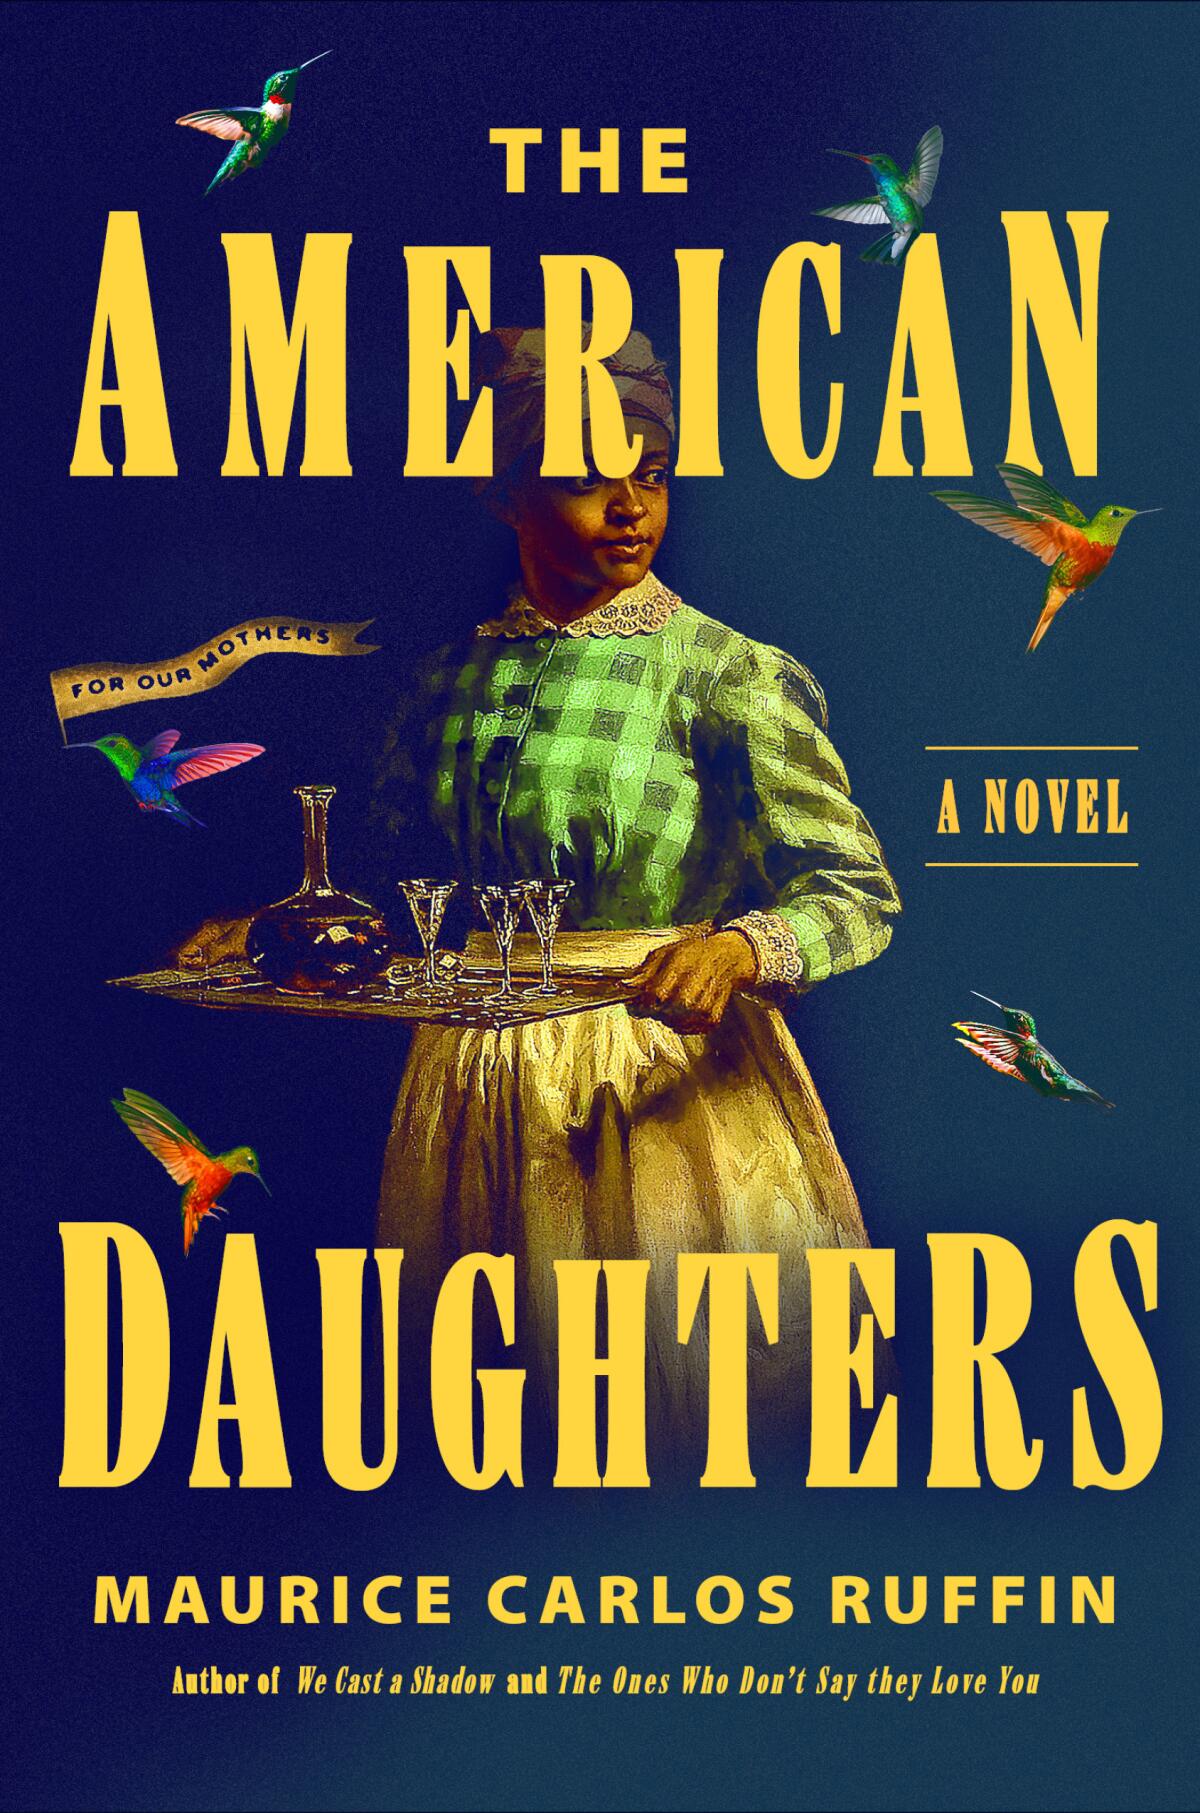 Book jacket for "The American Daughters" by Maurice Carlos Ruffin